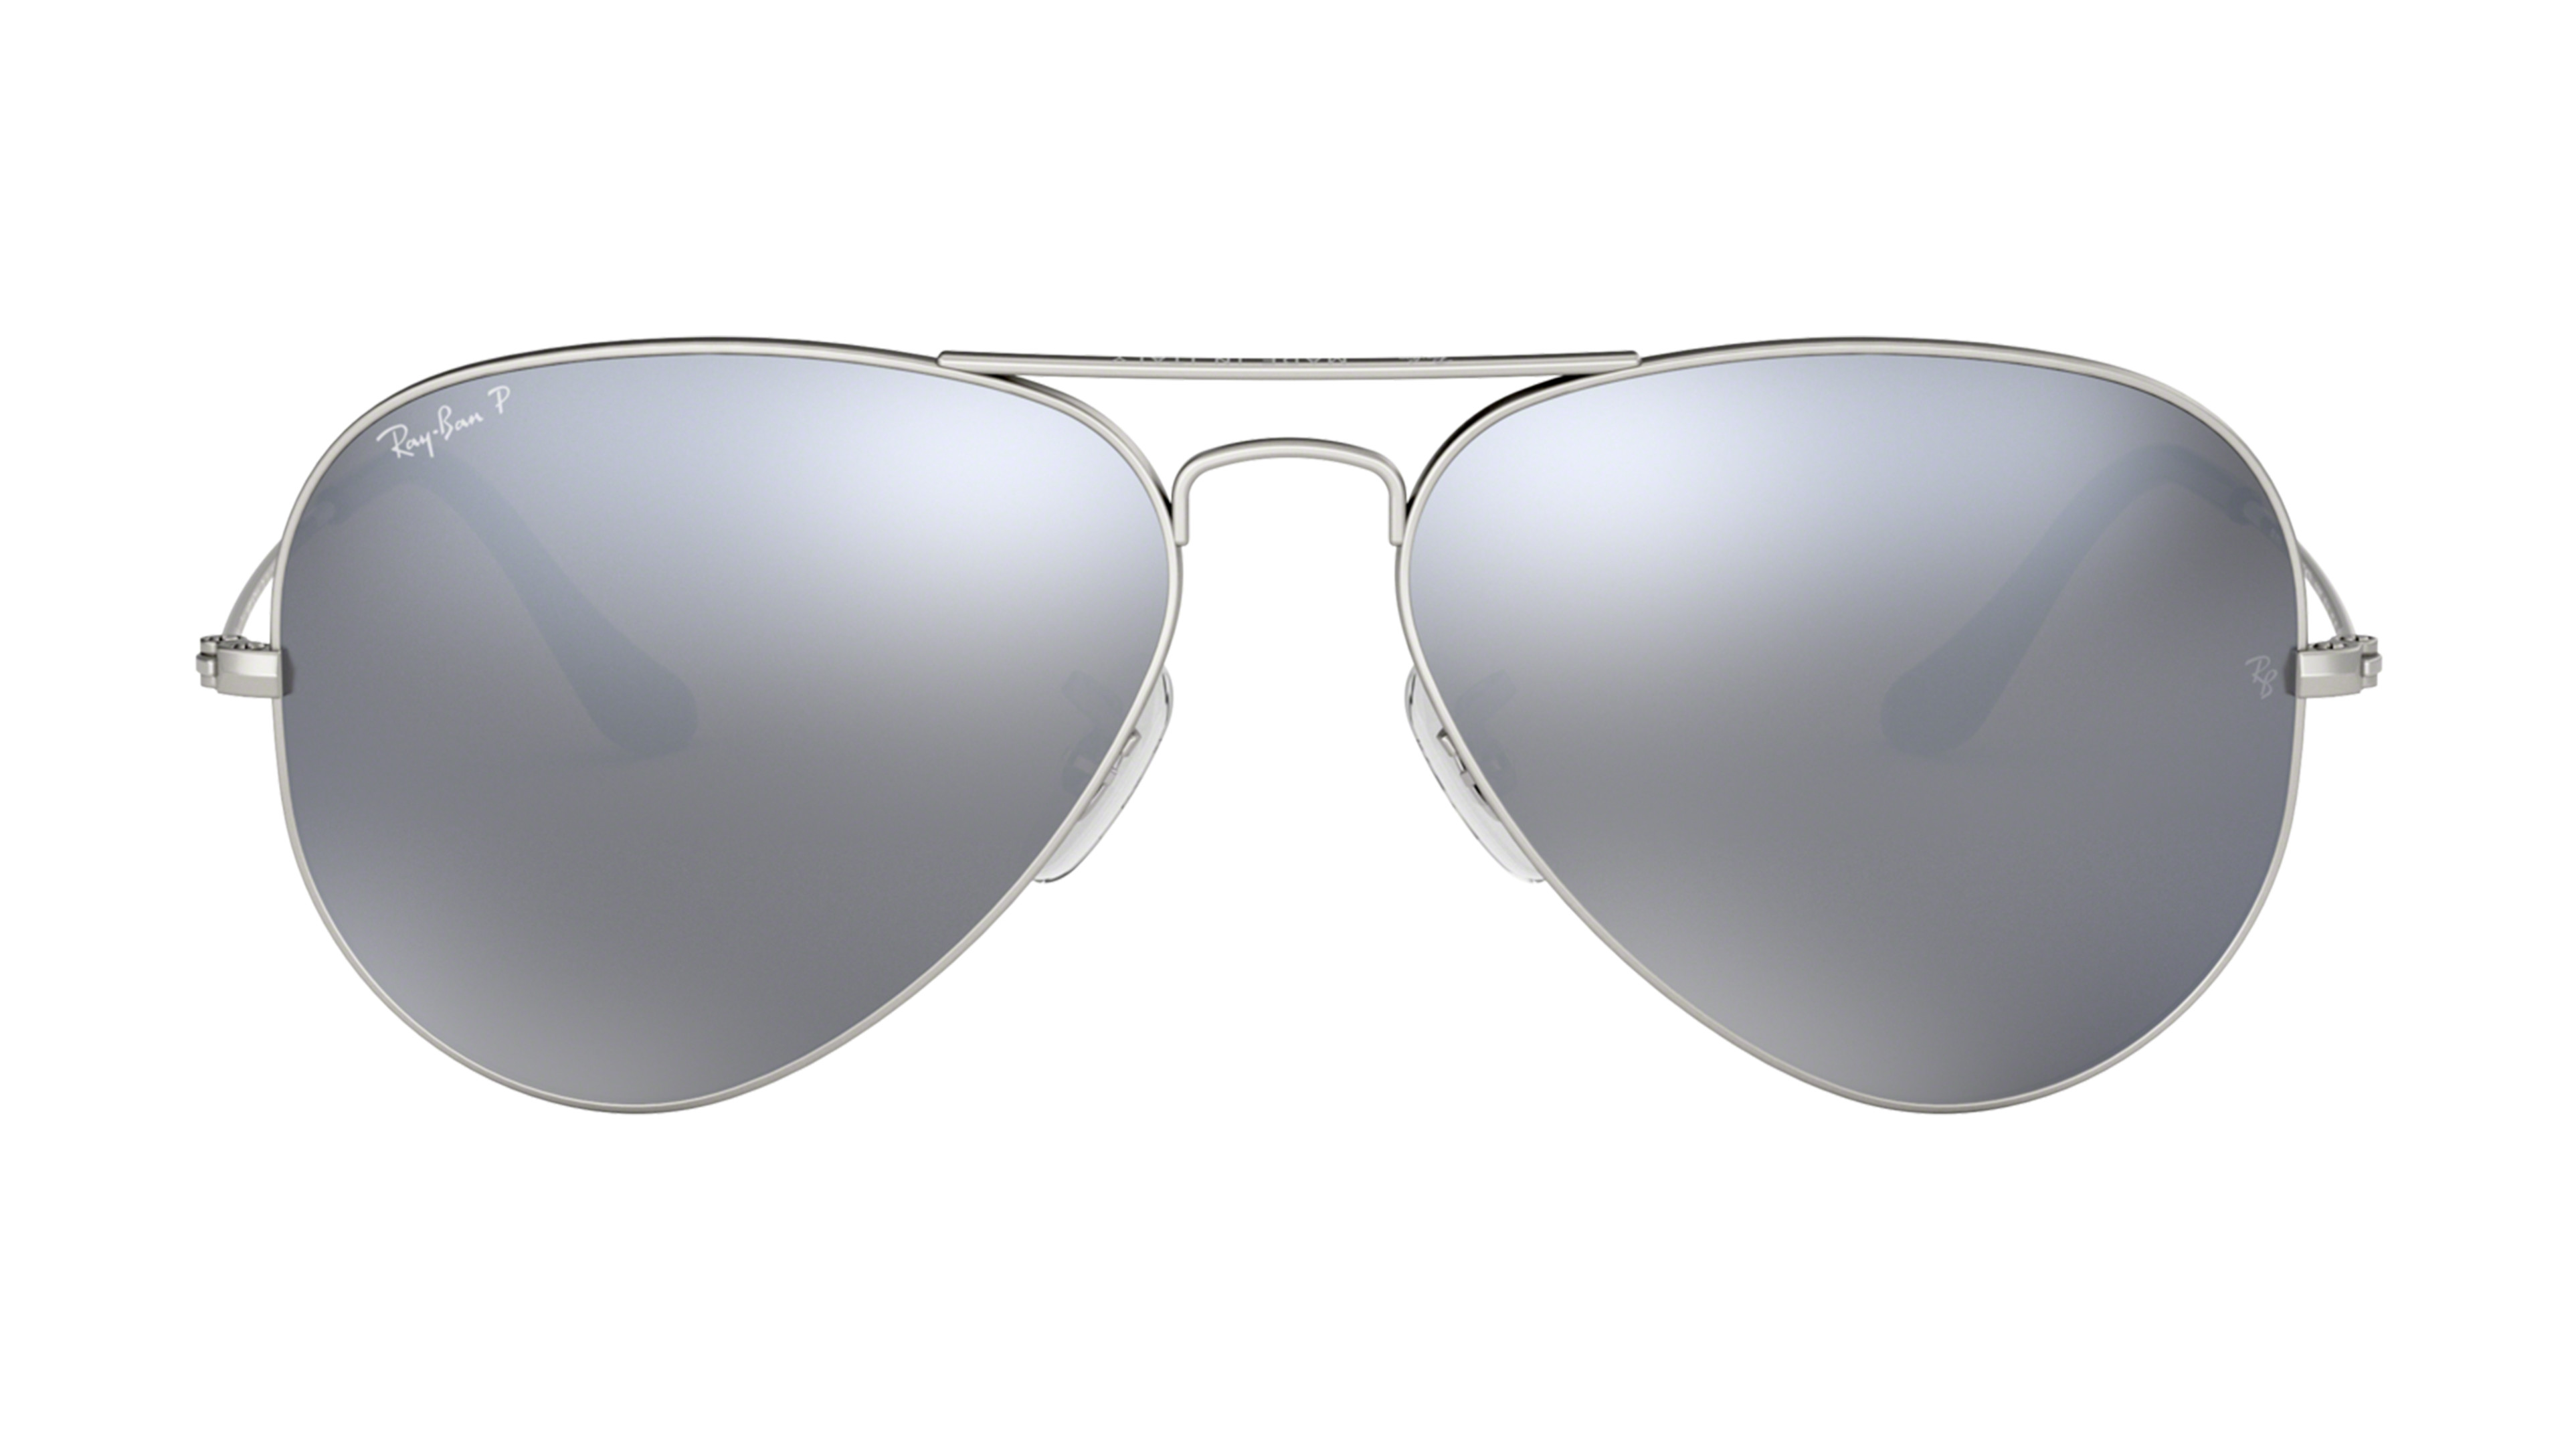 [products.image.front] Ray-Ban AVIATOR LARGE METAL 0RB3025 019/W3 Sonnenbrille